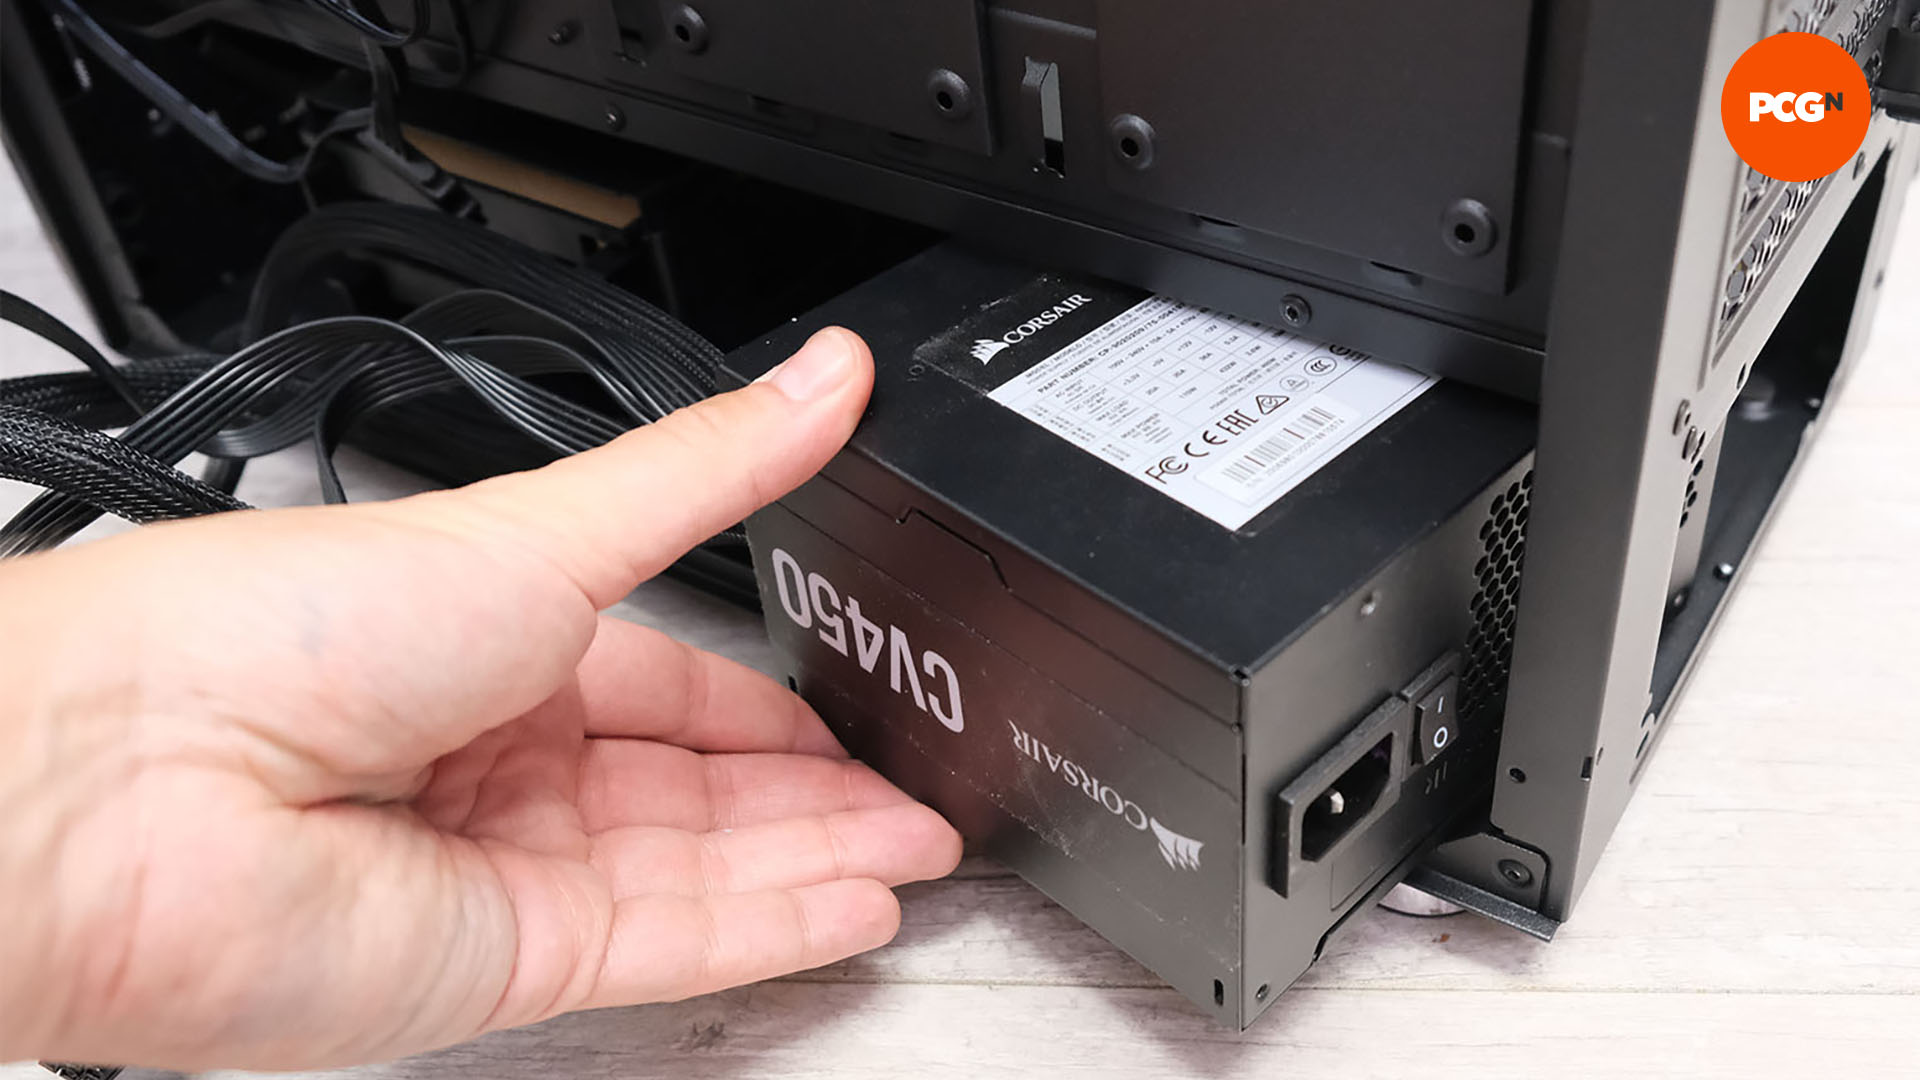 How to build a gaming PC: Install PSU